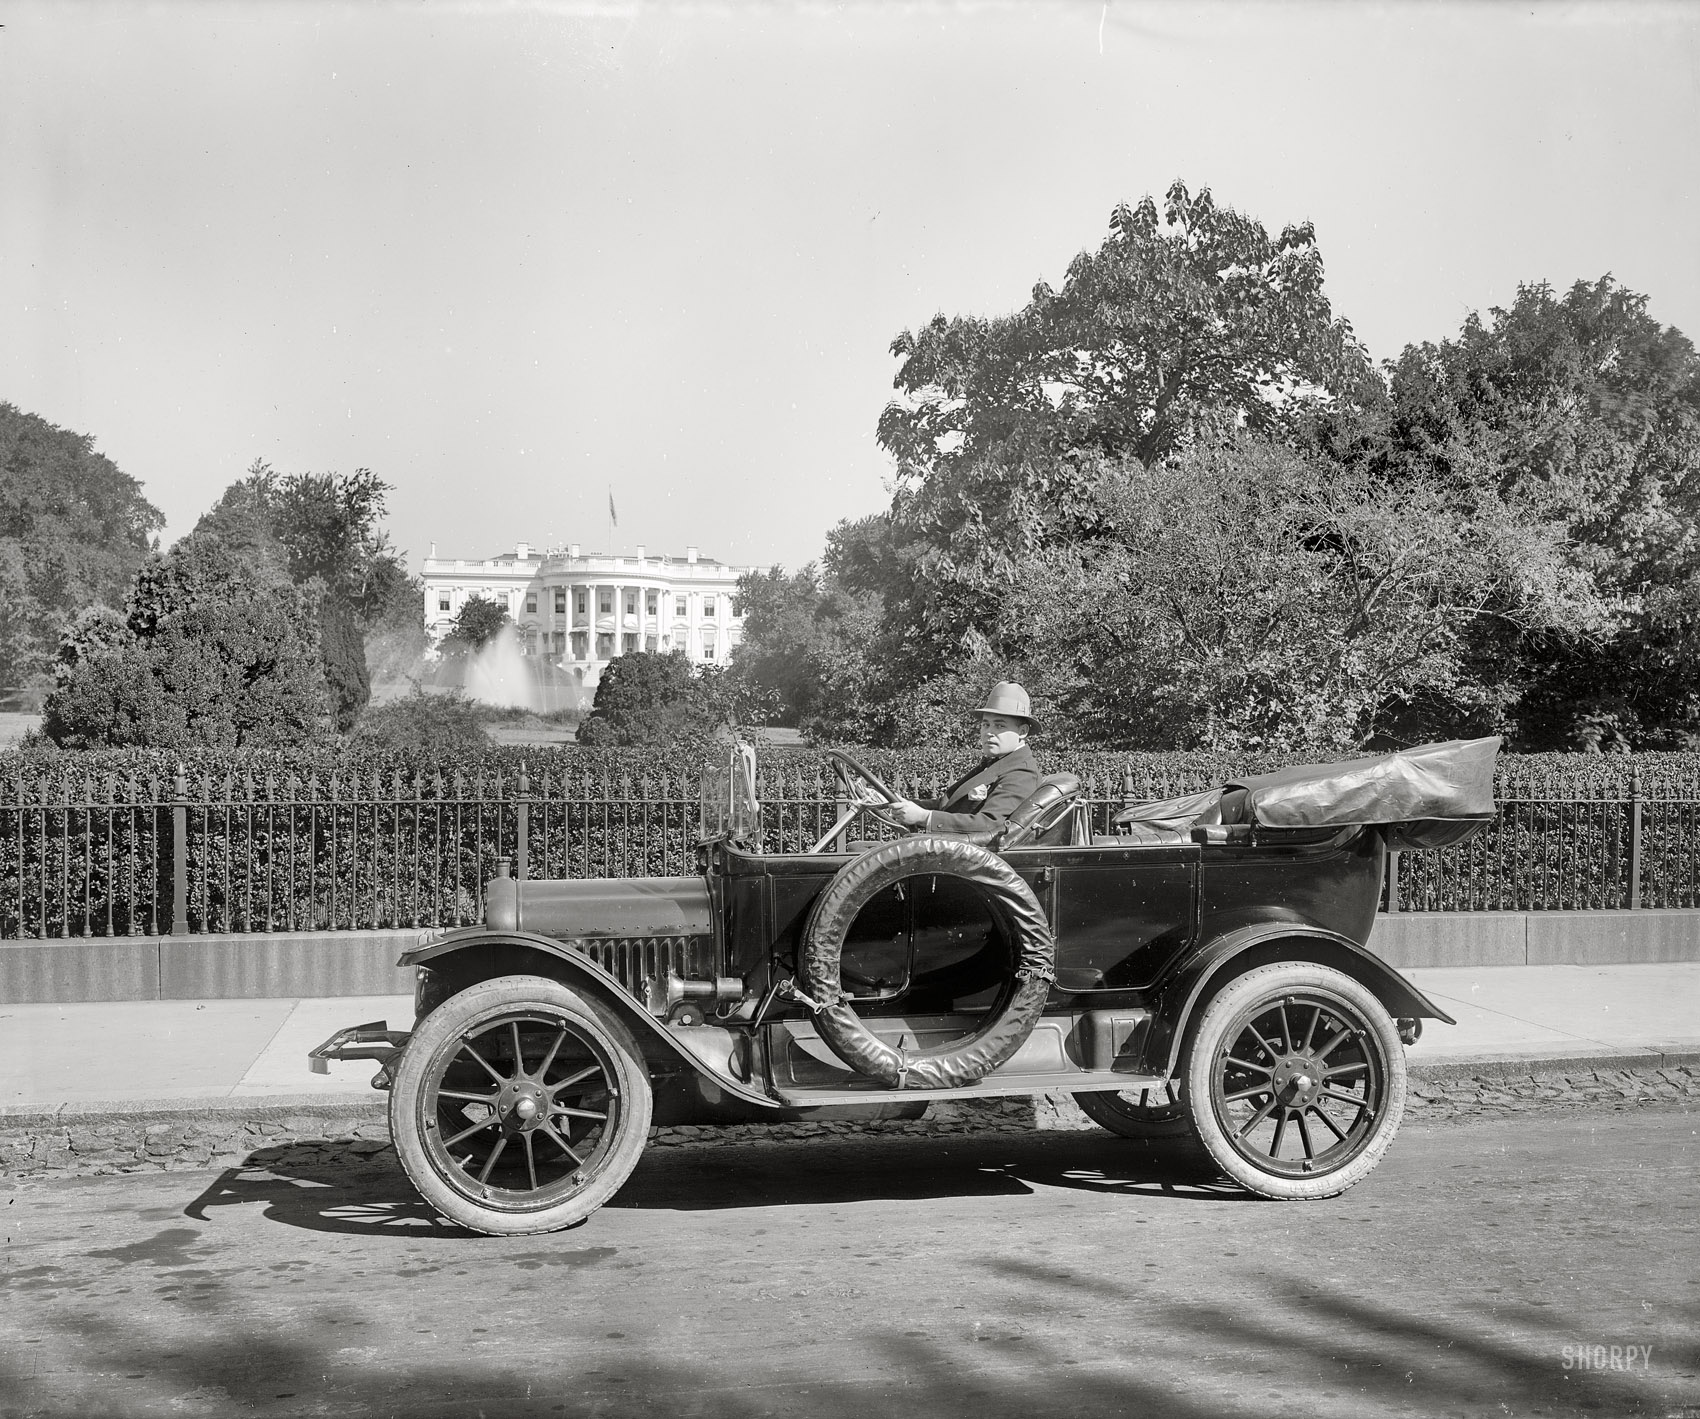 Washington, D.C., circa 1917. "Soterios Nicholson in auto." This "well-known Greek attorney" had a long and occasionally eventful career in Baltimore and Washington. Harris & Ewing Collection glass negative. View full size.